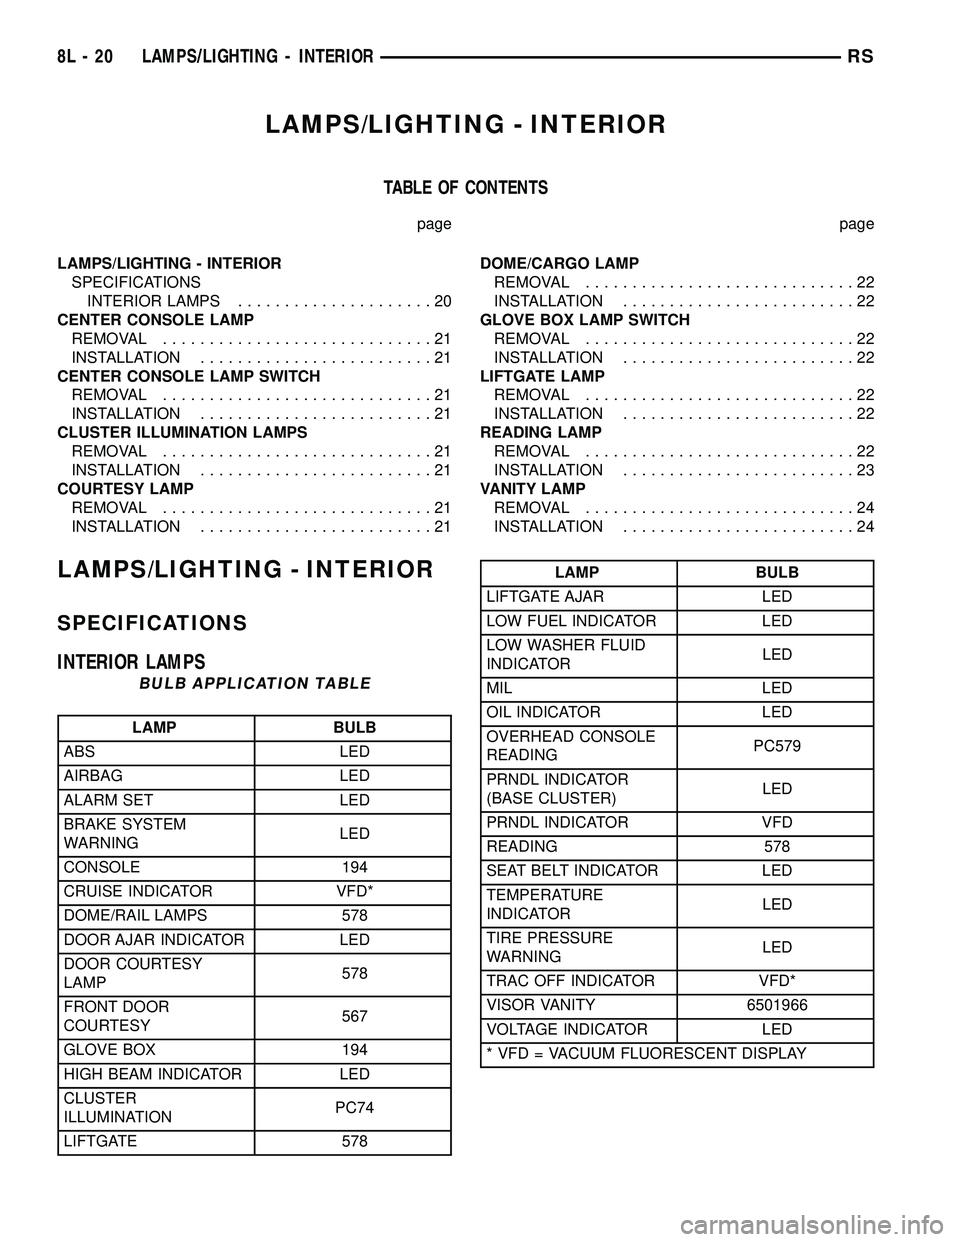 CHRYSLER VOYAGER 2005 Owners Manual LAMPS/LIGHTING - INTERIOR
TABLE OF CONTENTS
page page
LAMPS/LIGHTING - INTERIOR
SPECIFICATIONS
INTERIOR LAMPS.....................20
CENTER CONSOLE LAMP
REMOVAL.............................21
INSTALLA